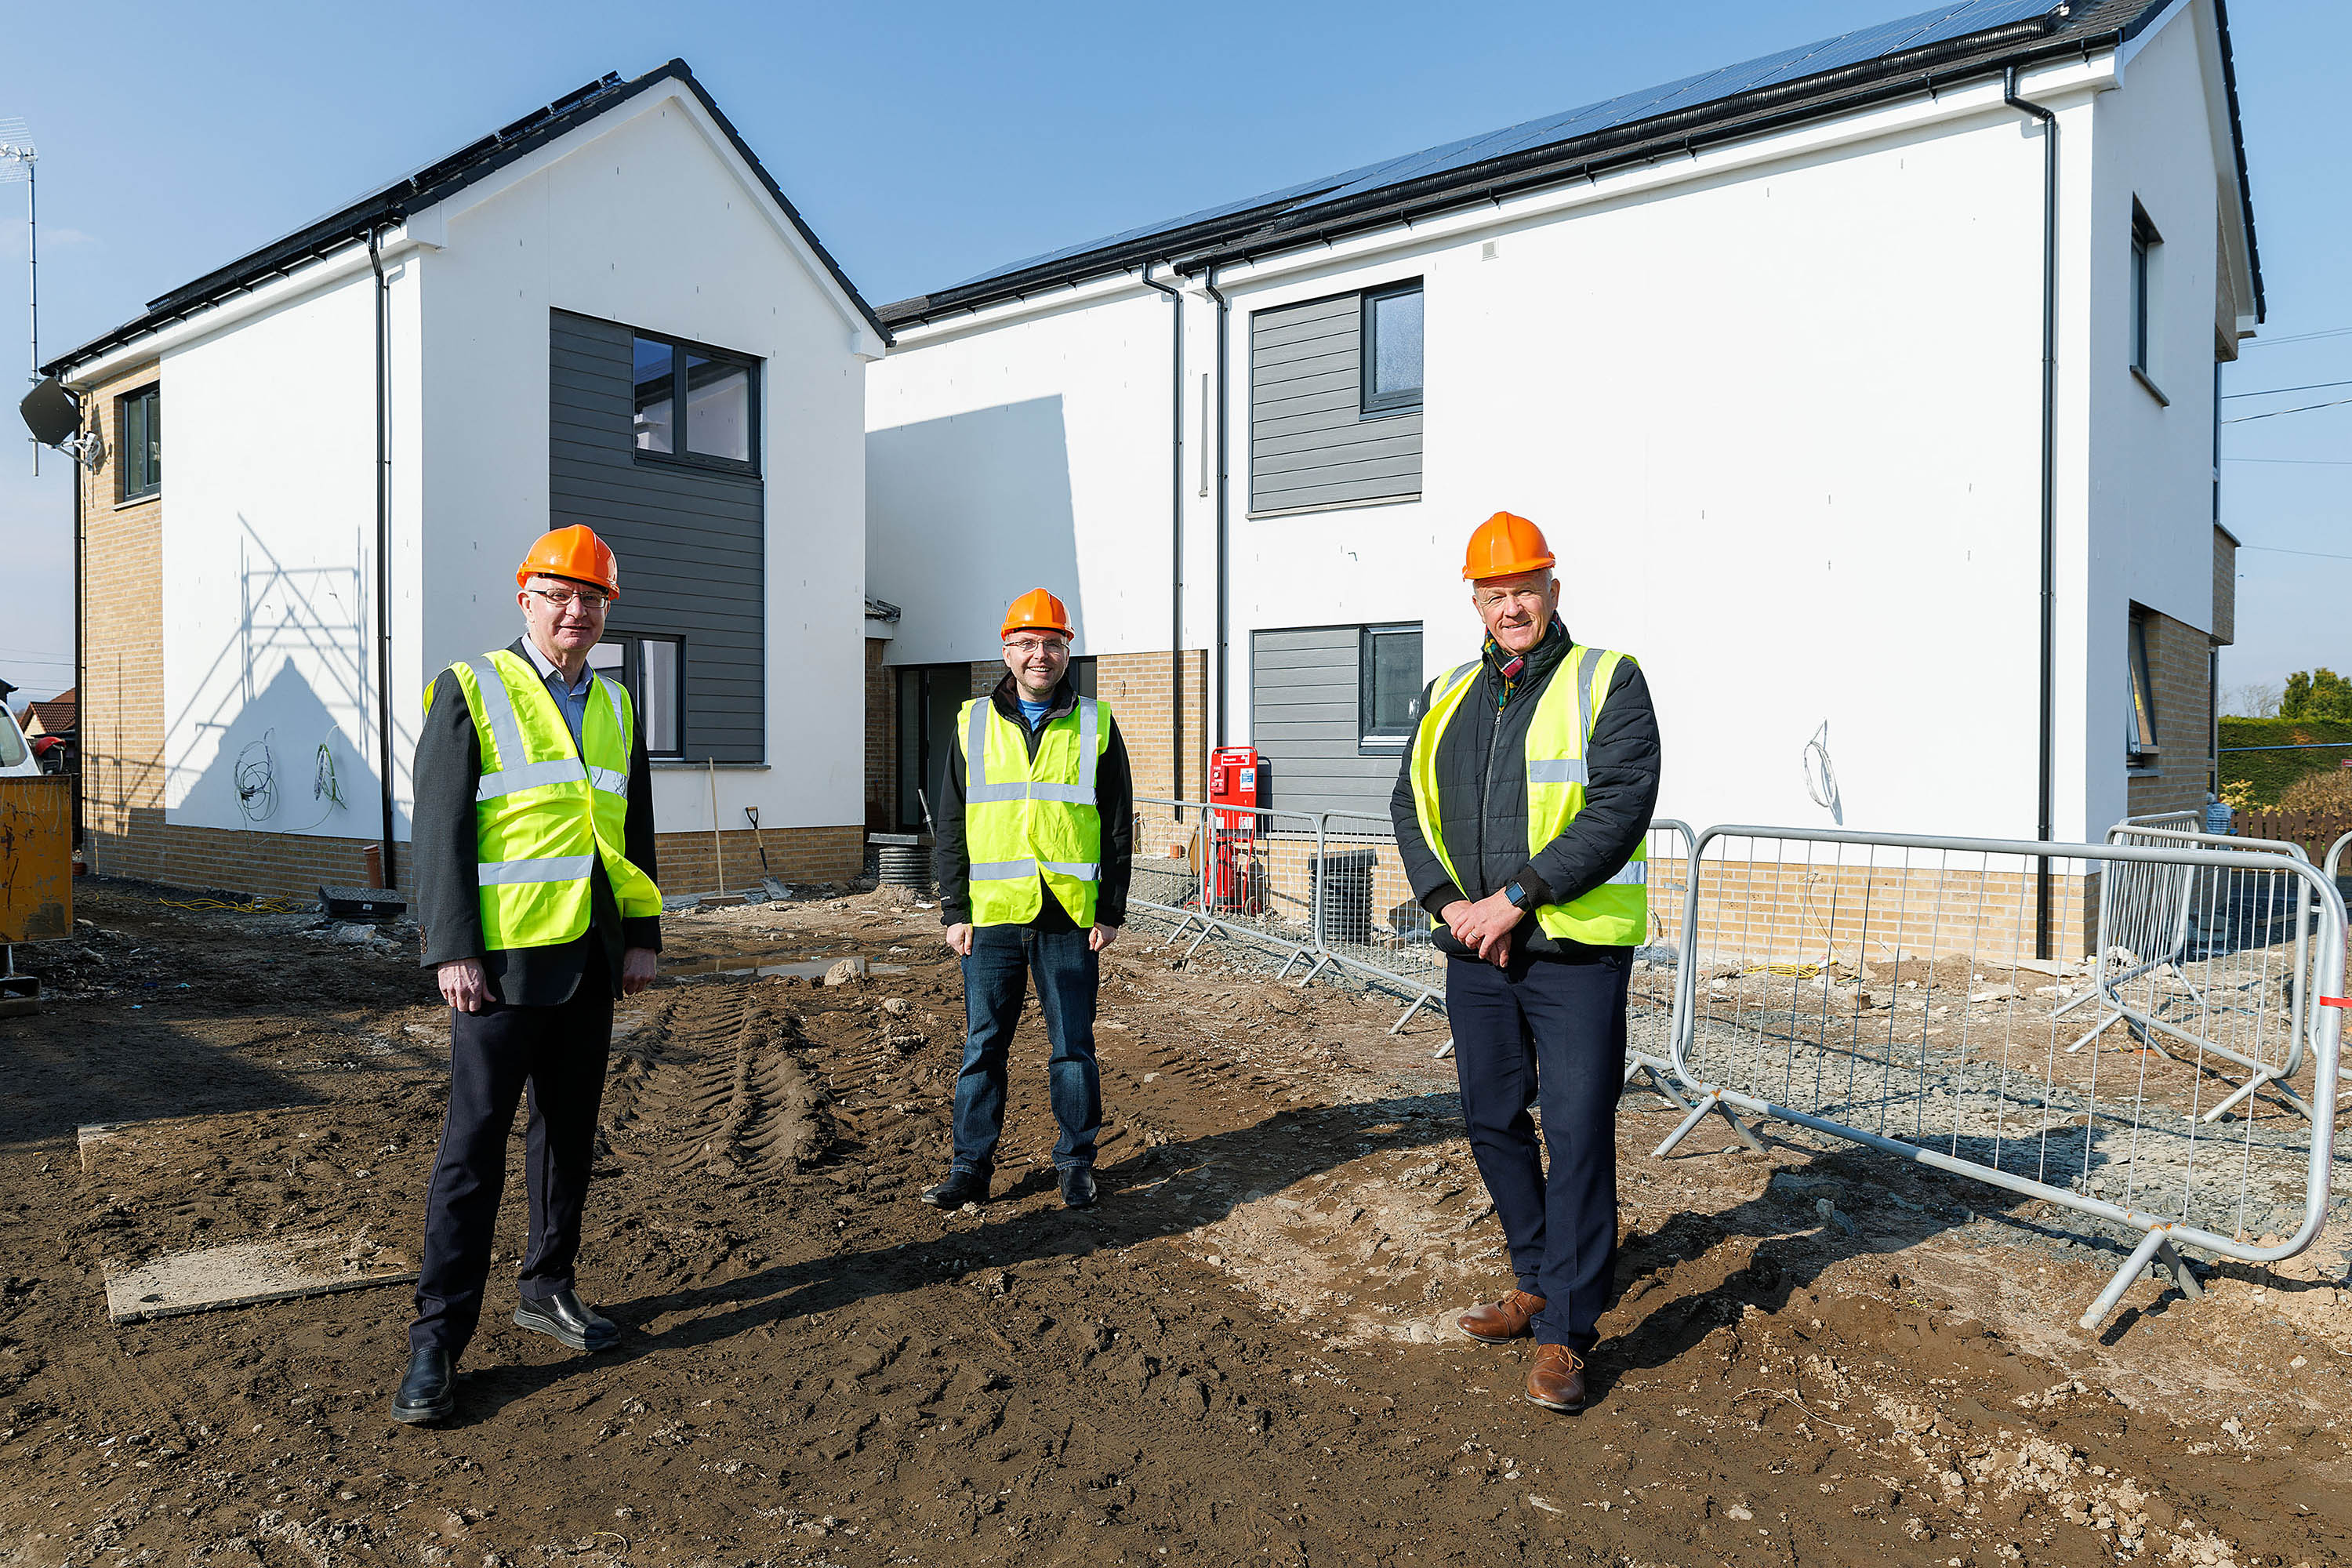 Work progressing on 22 new council houses in Cowie